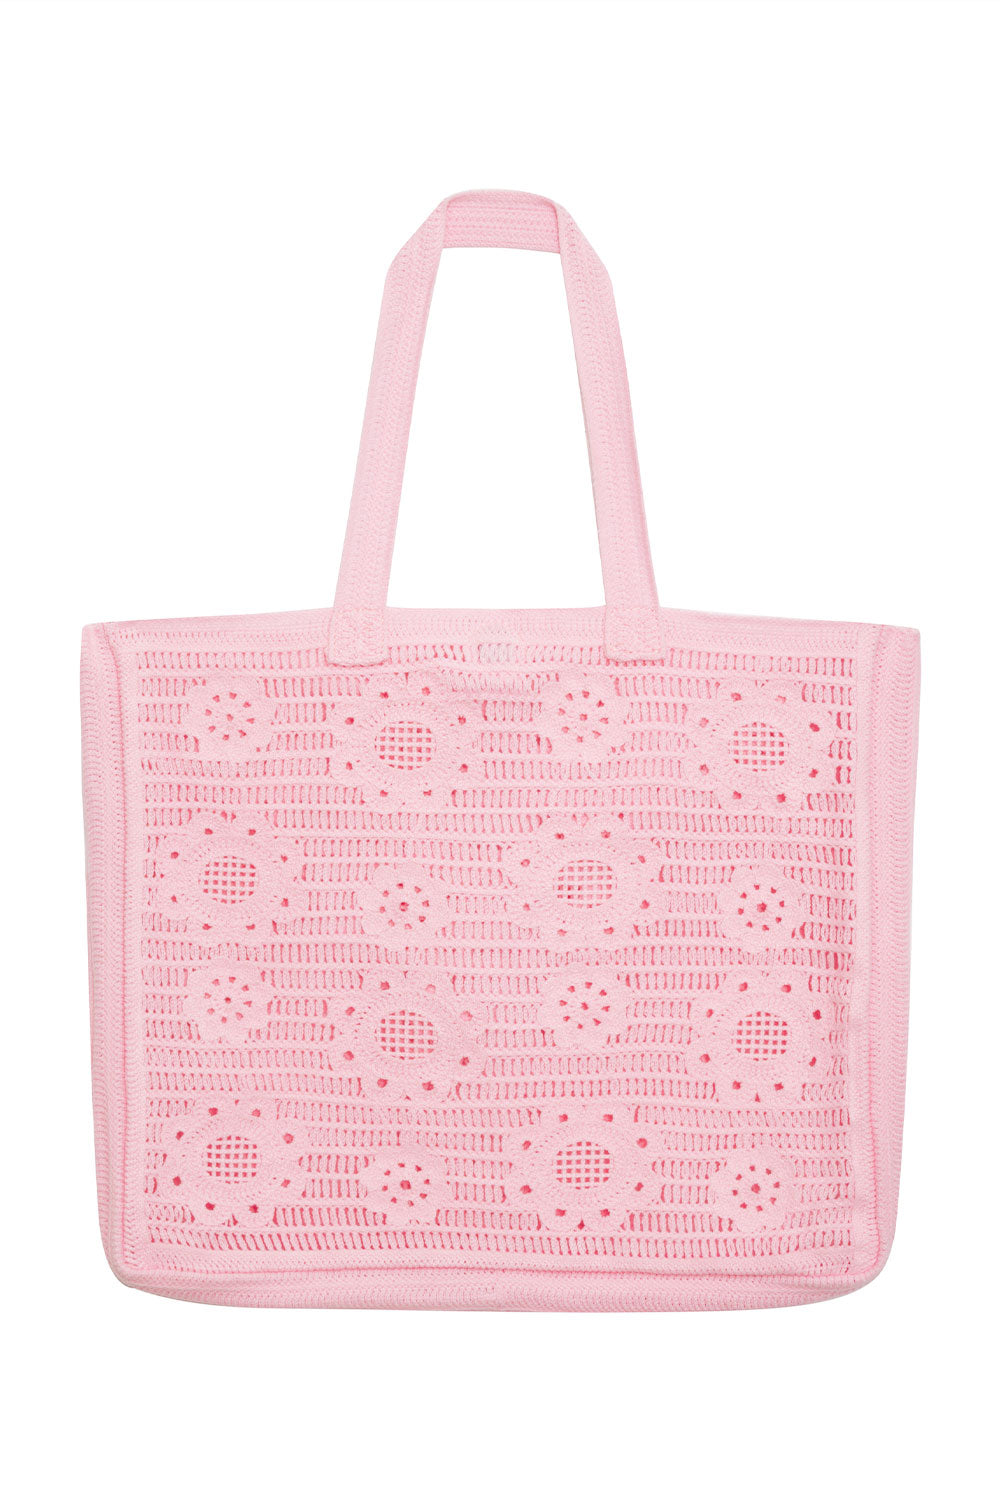 Personalized Hot Pink Ultimate Tote Beach Tote Personalized -  Denmark